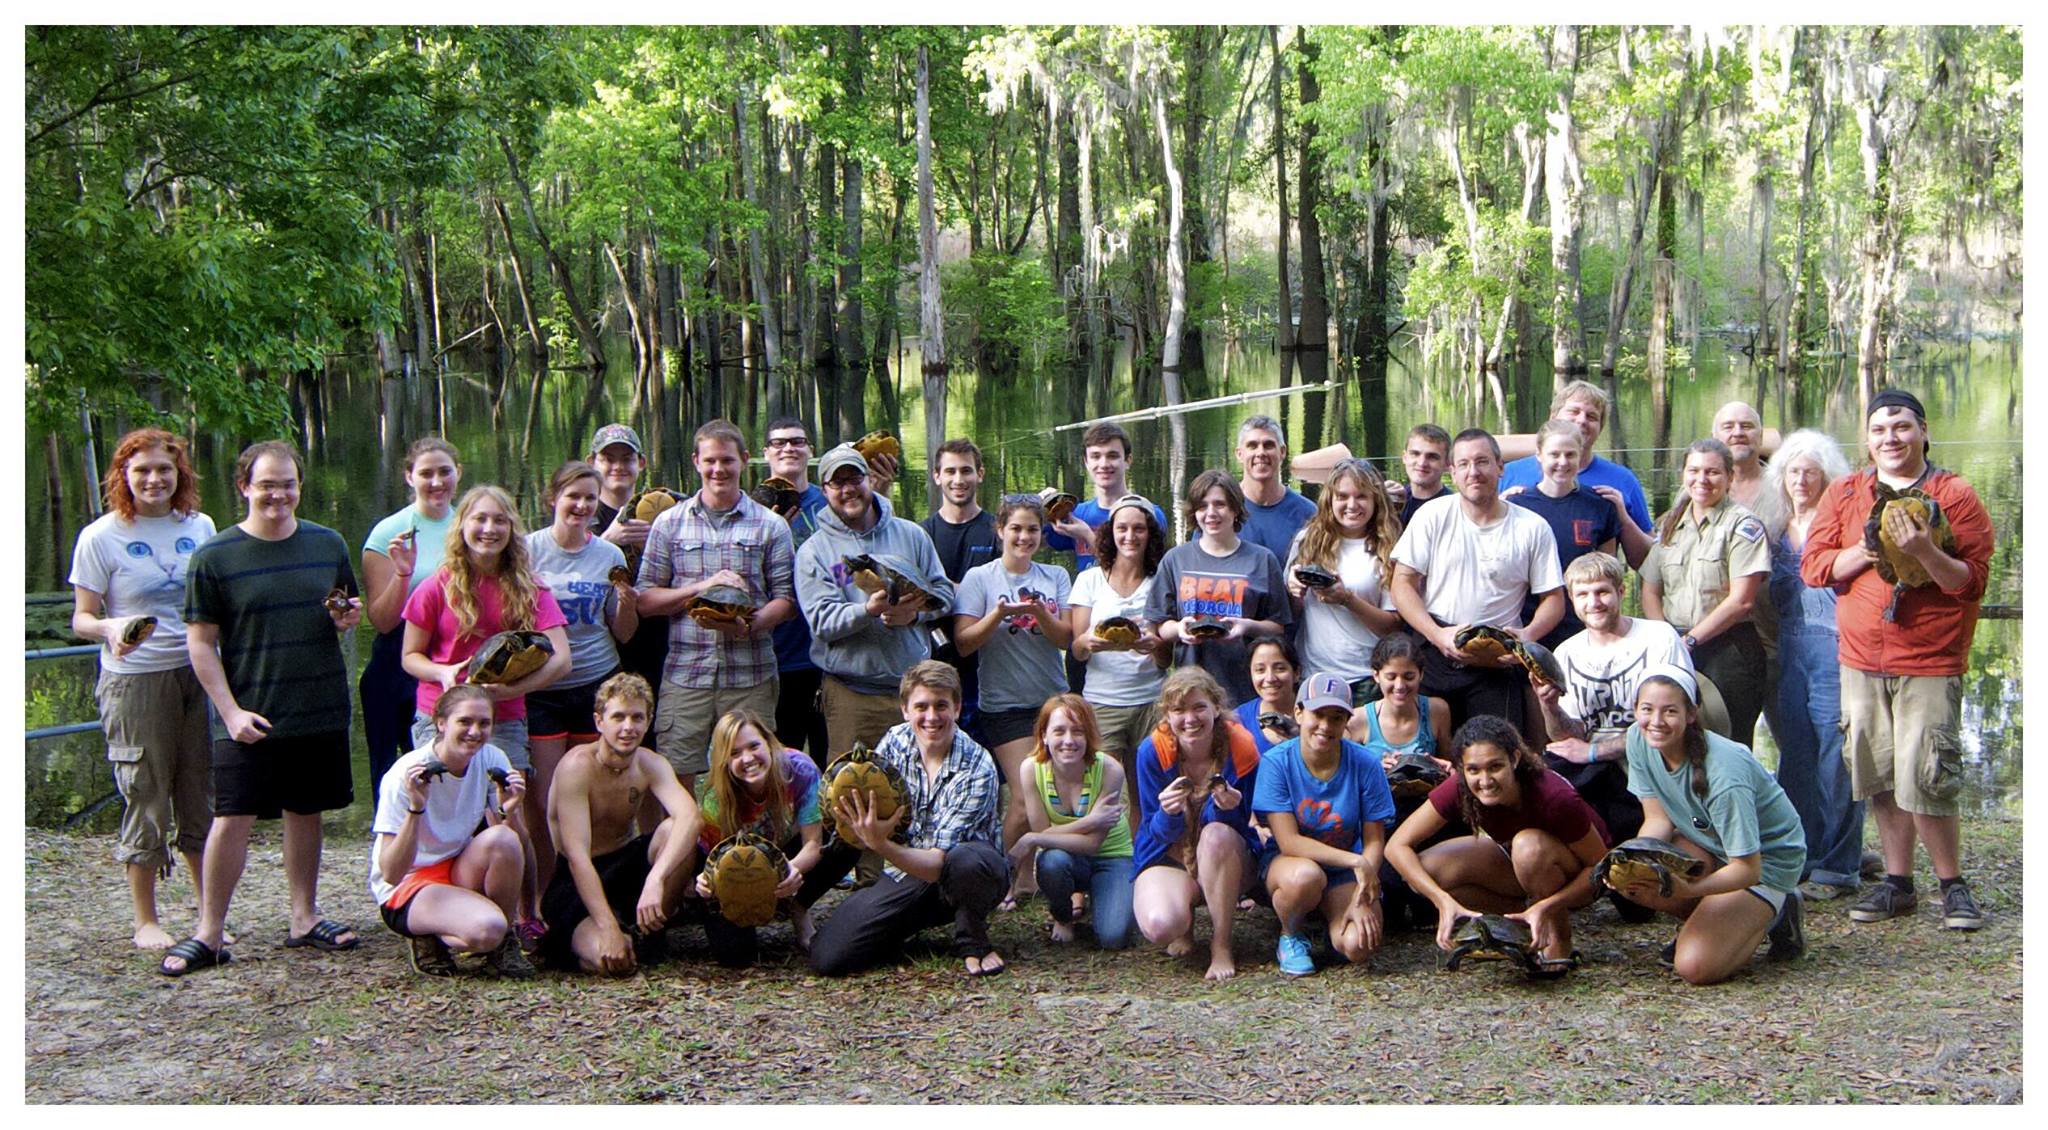 Students from Santa Fe College and the University of Florida posed for a group photo with park staff and volunteers from the naftrg